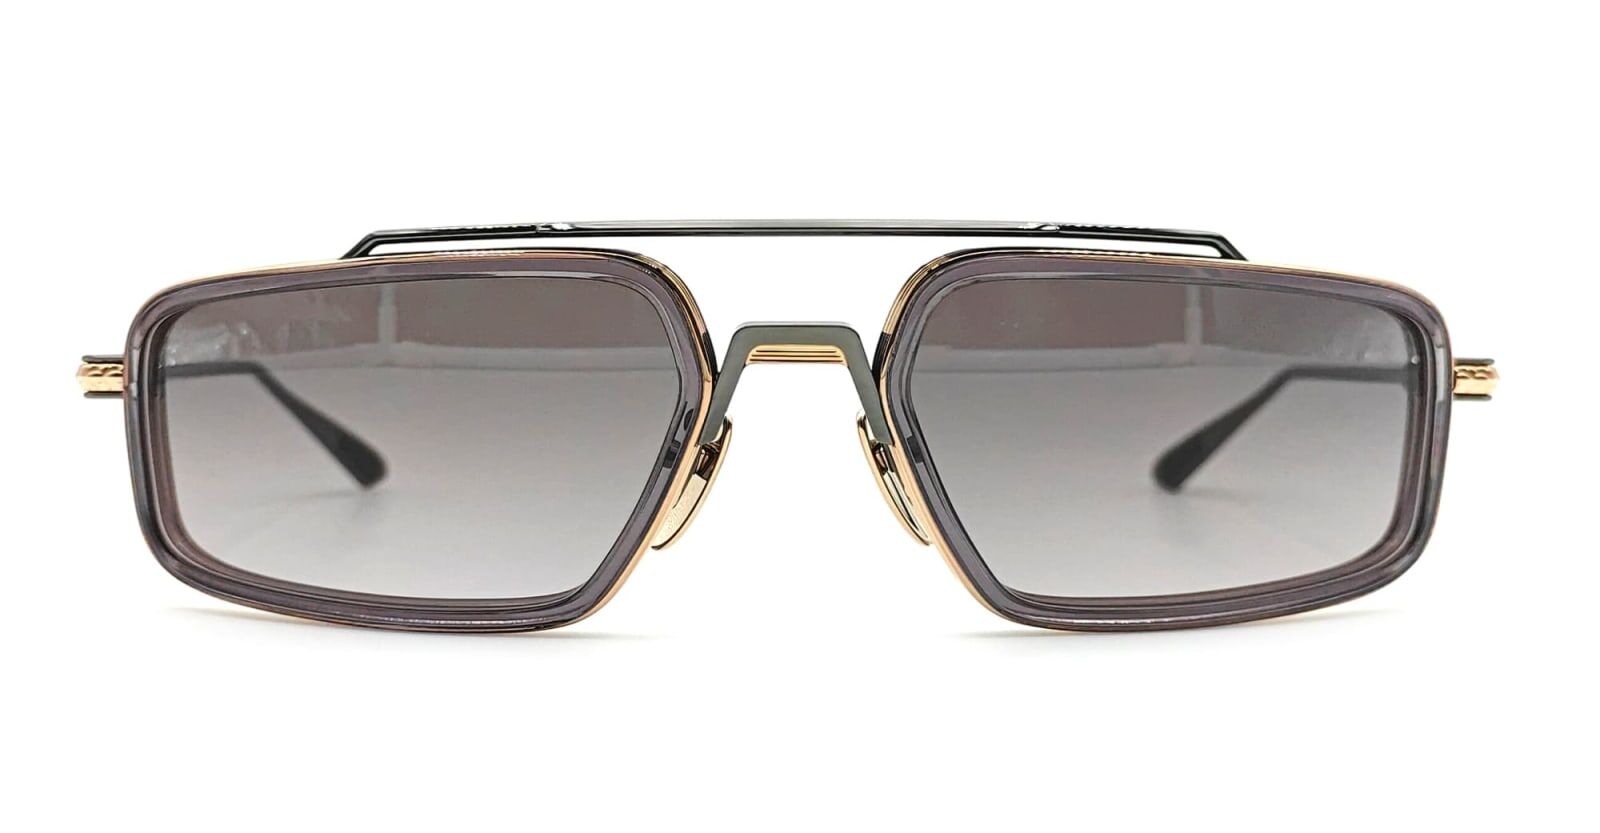 Chrome Hearts Eader - Gold Plated / Gunmetal Sunglasses - gold/grey - male - Size: 0one size